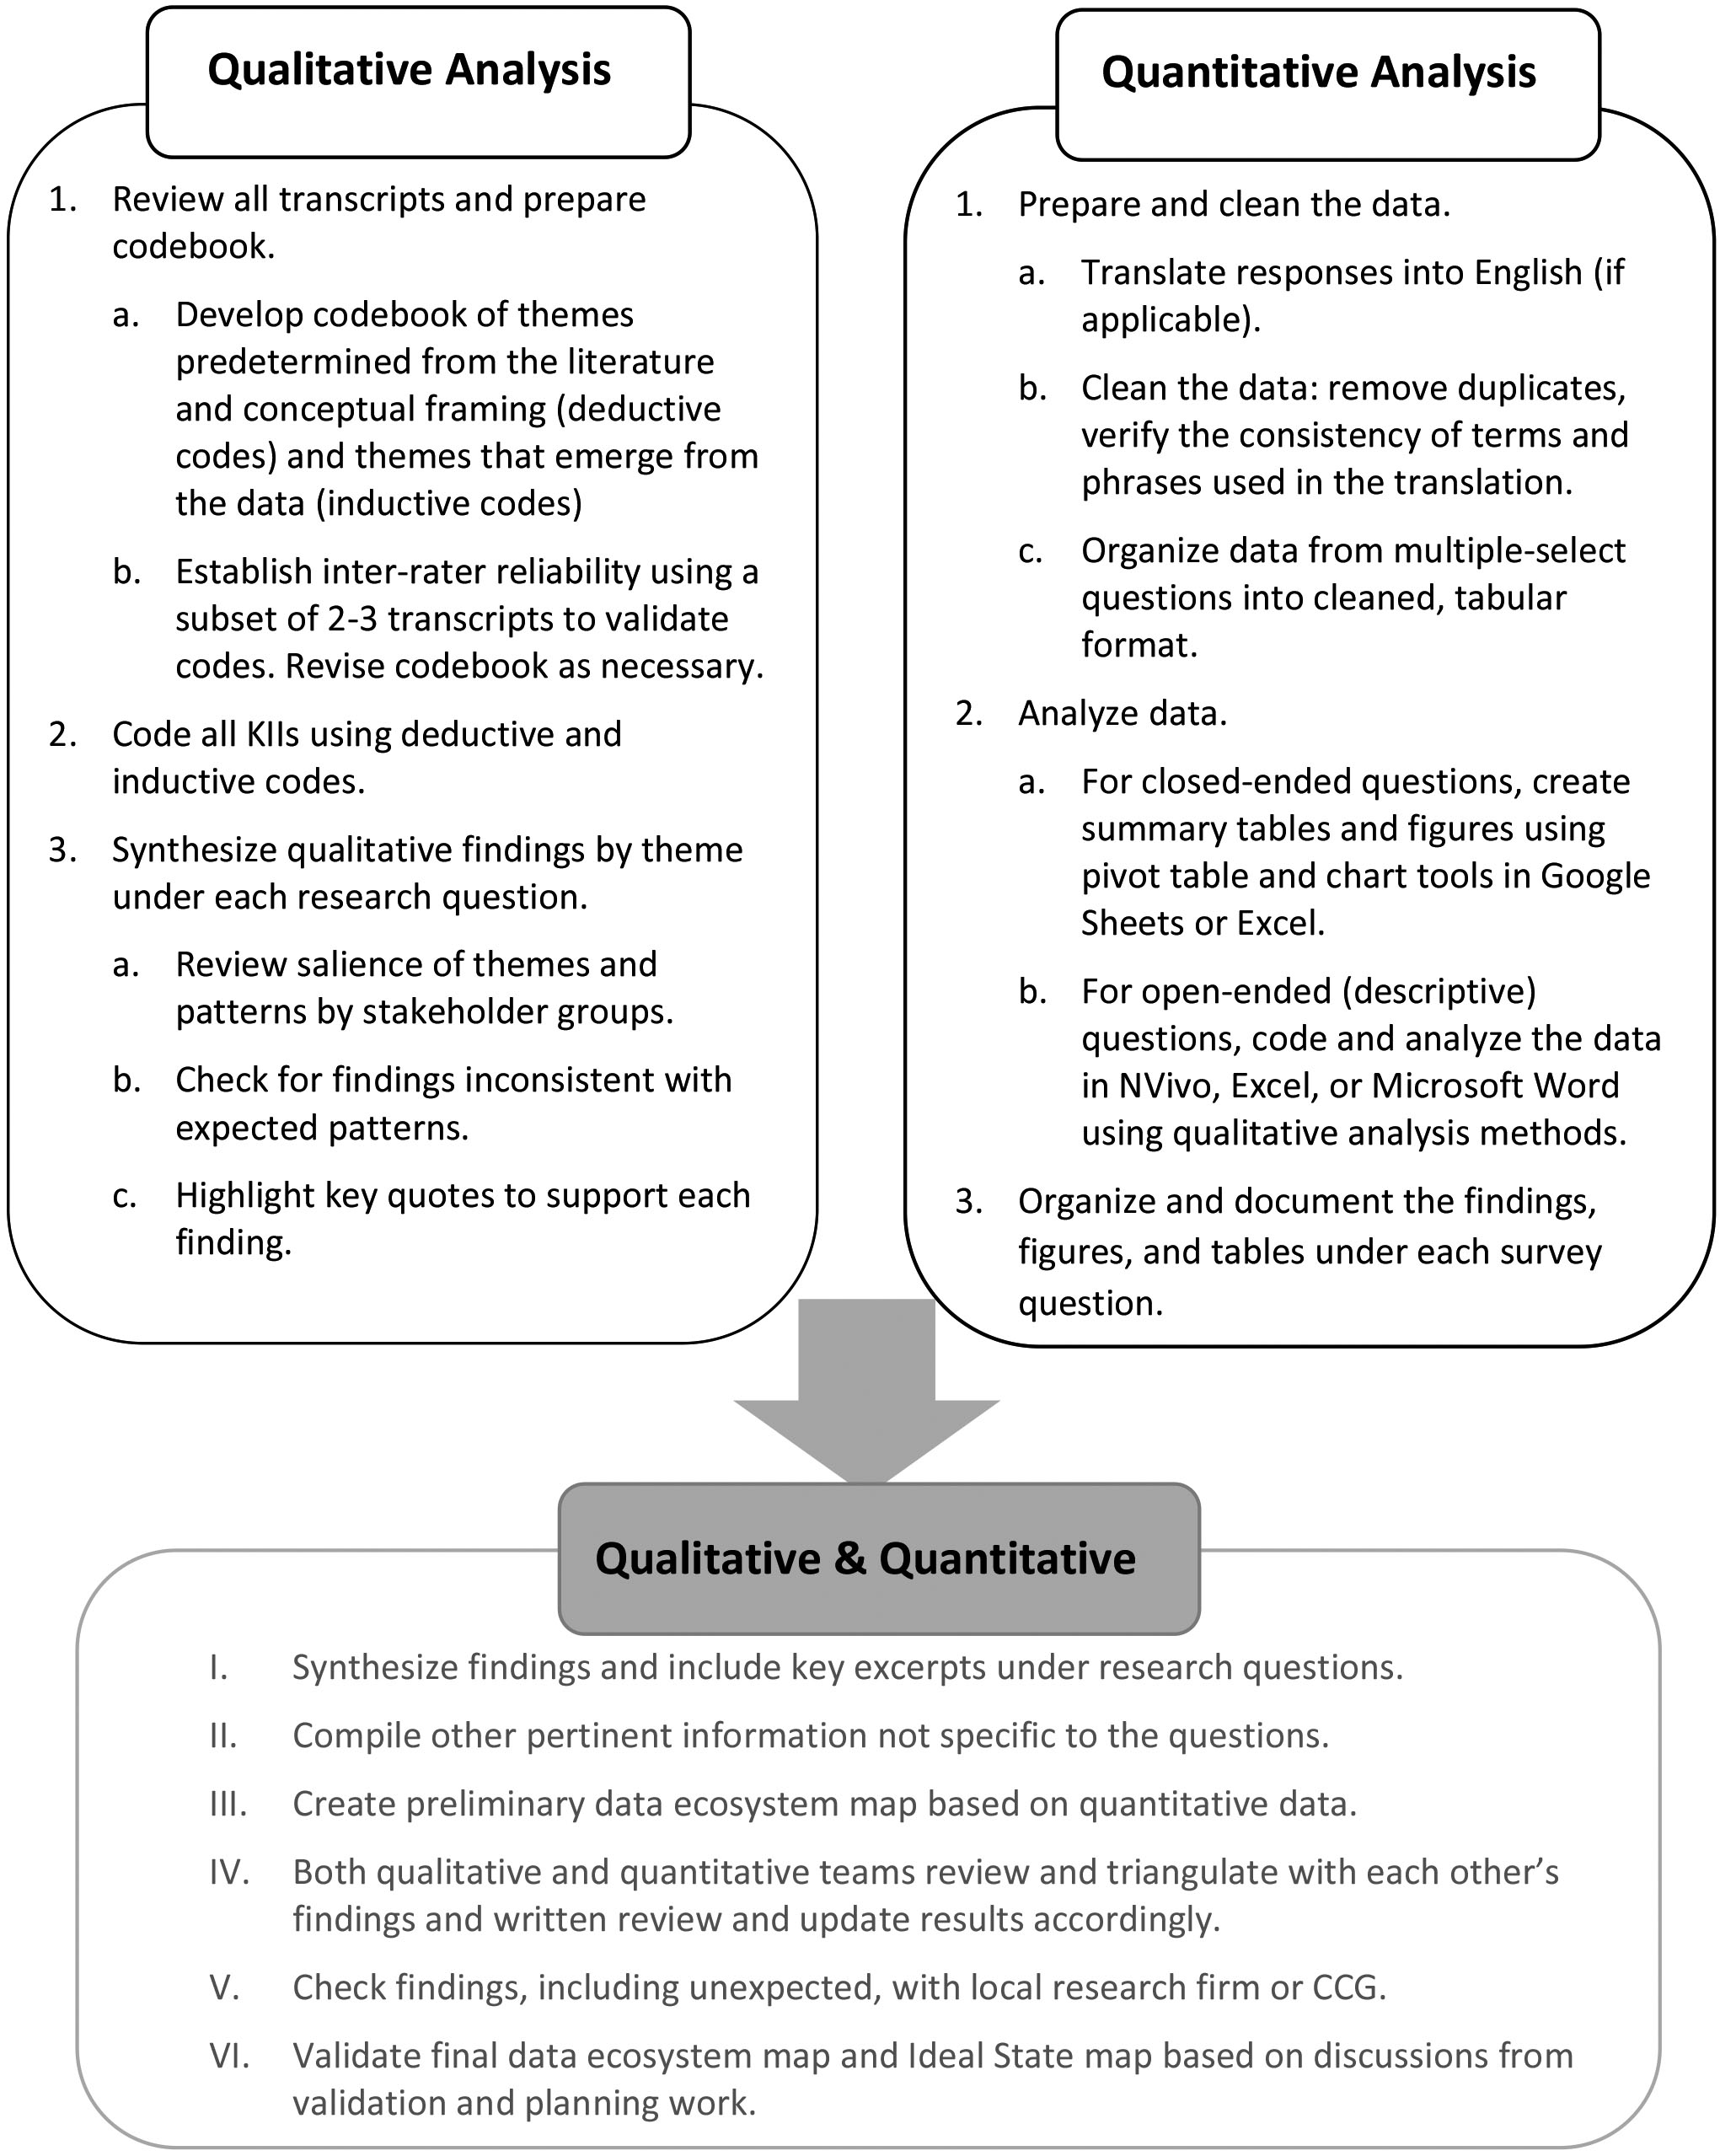 Overview of mixed methods approach.